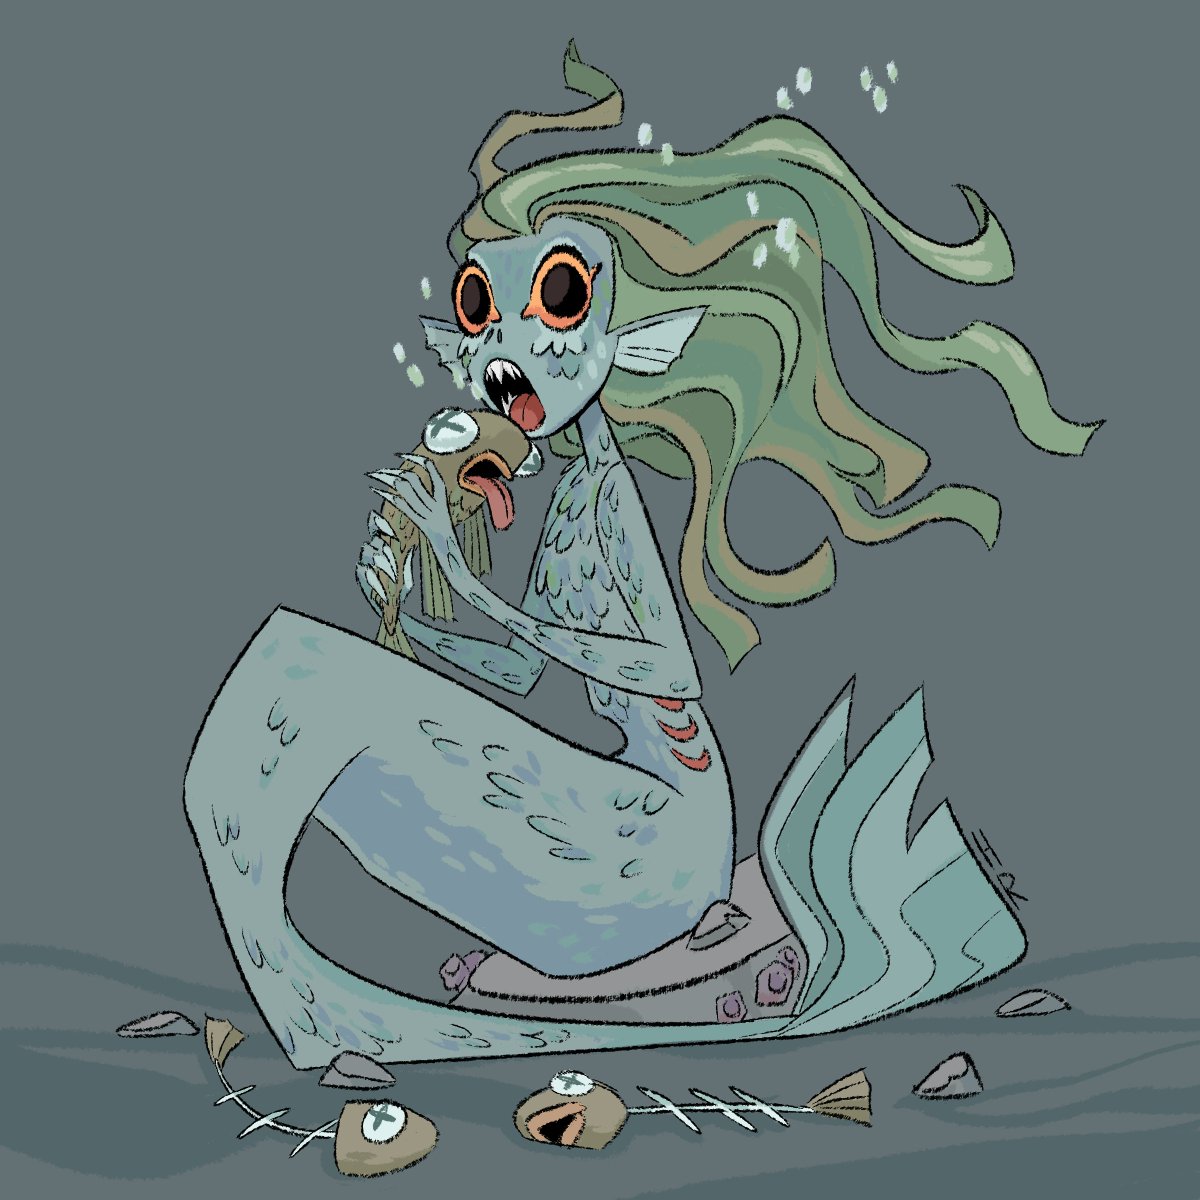 Don't interrupt her while she's eating! #mermay2023